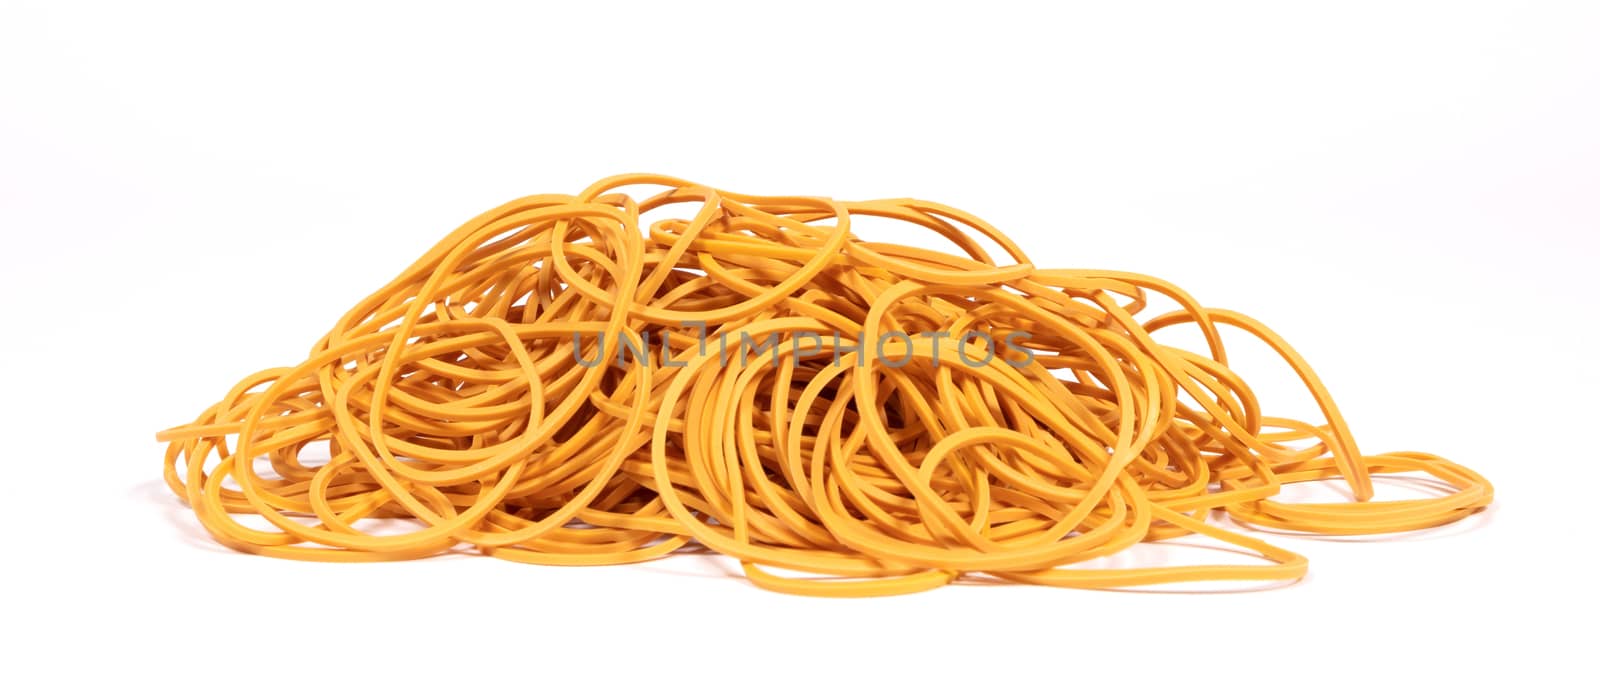 Yellow rubber elastics isolated on a white background